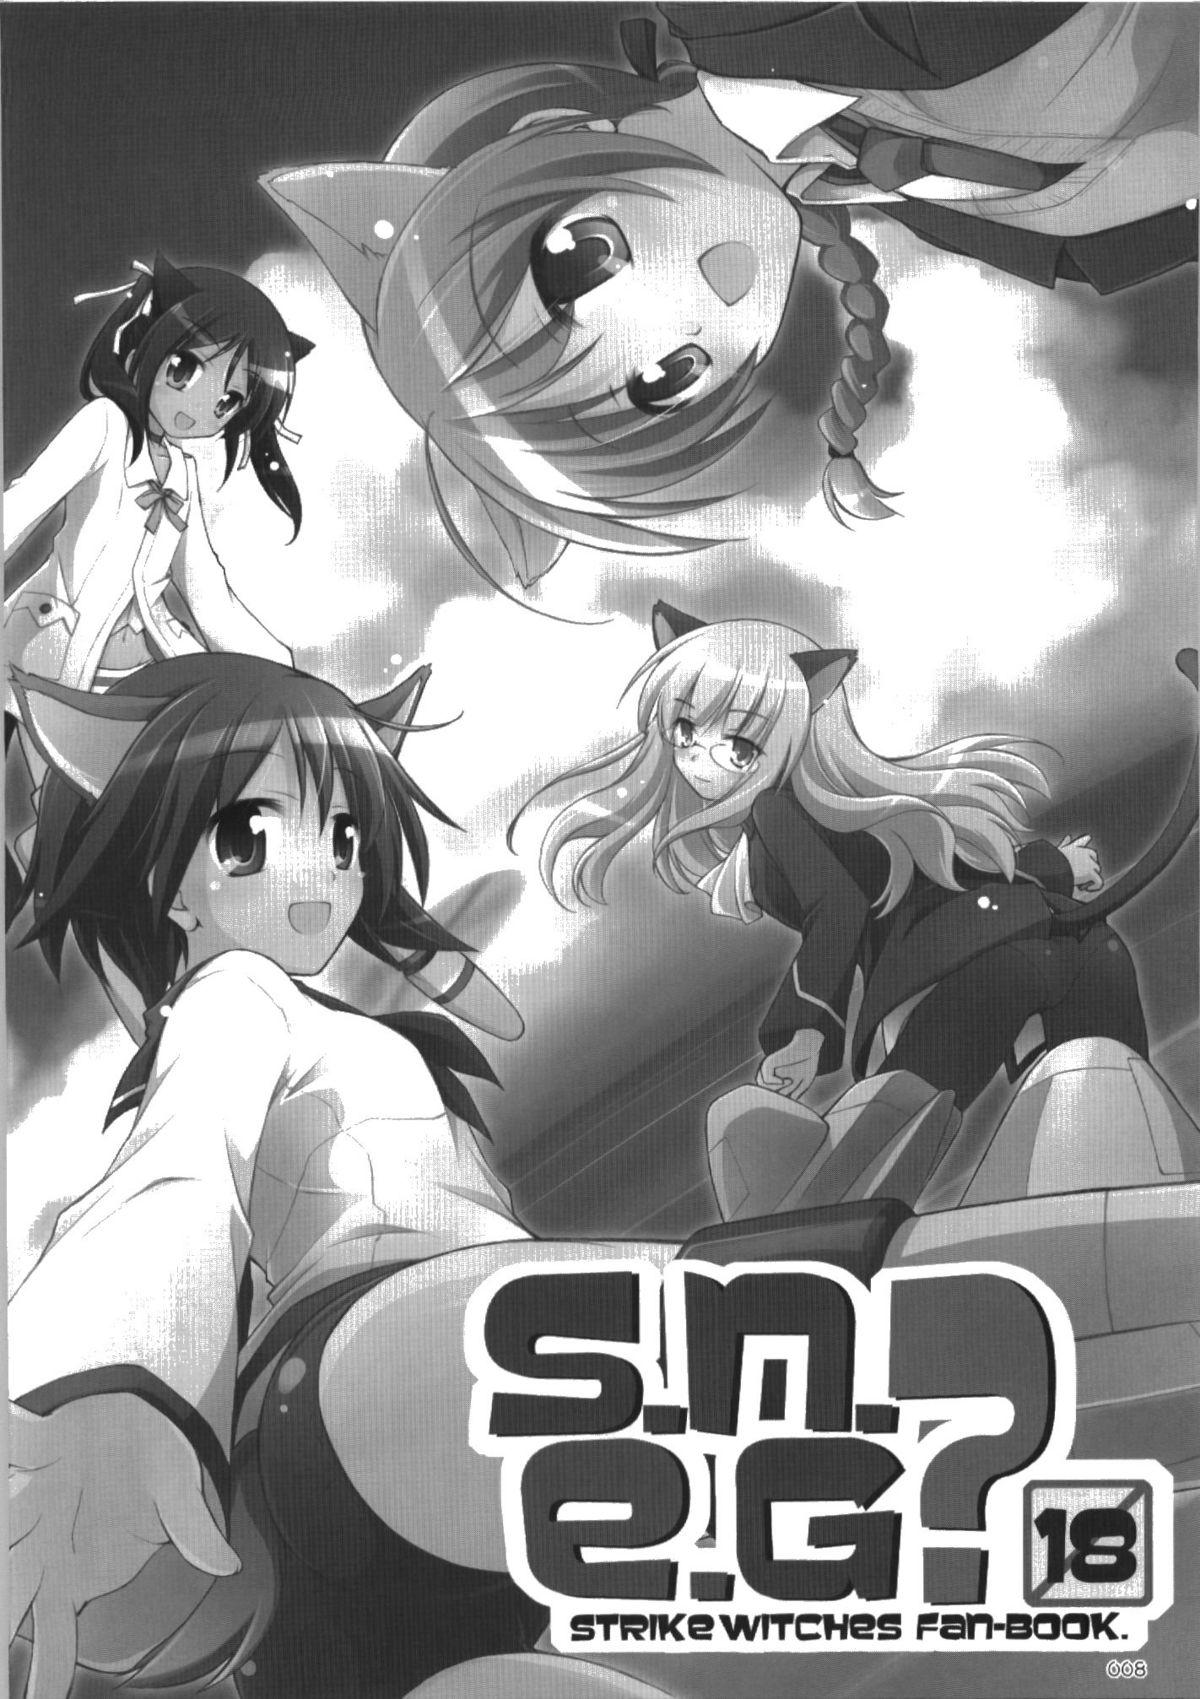 Transvestite s.n.e.g? - Strike witches Culo - Page 8